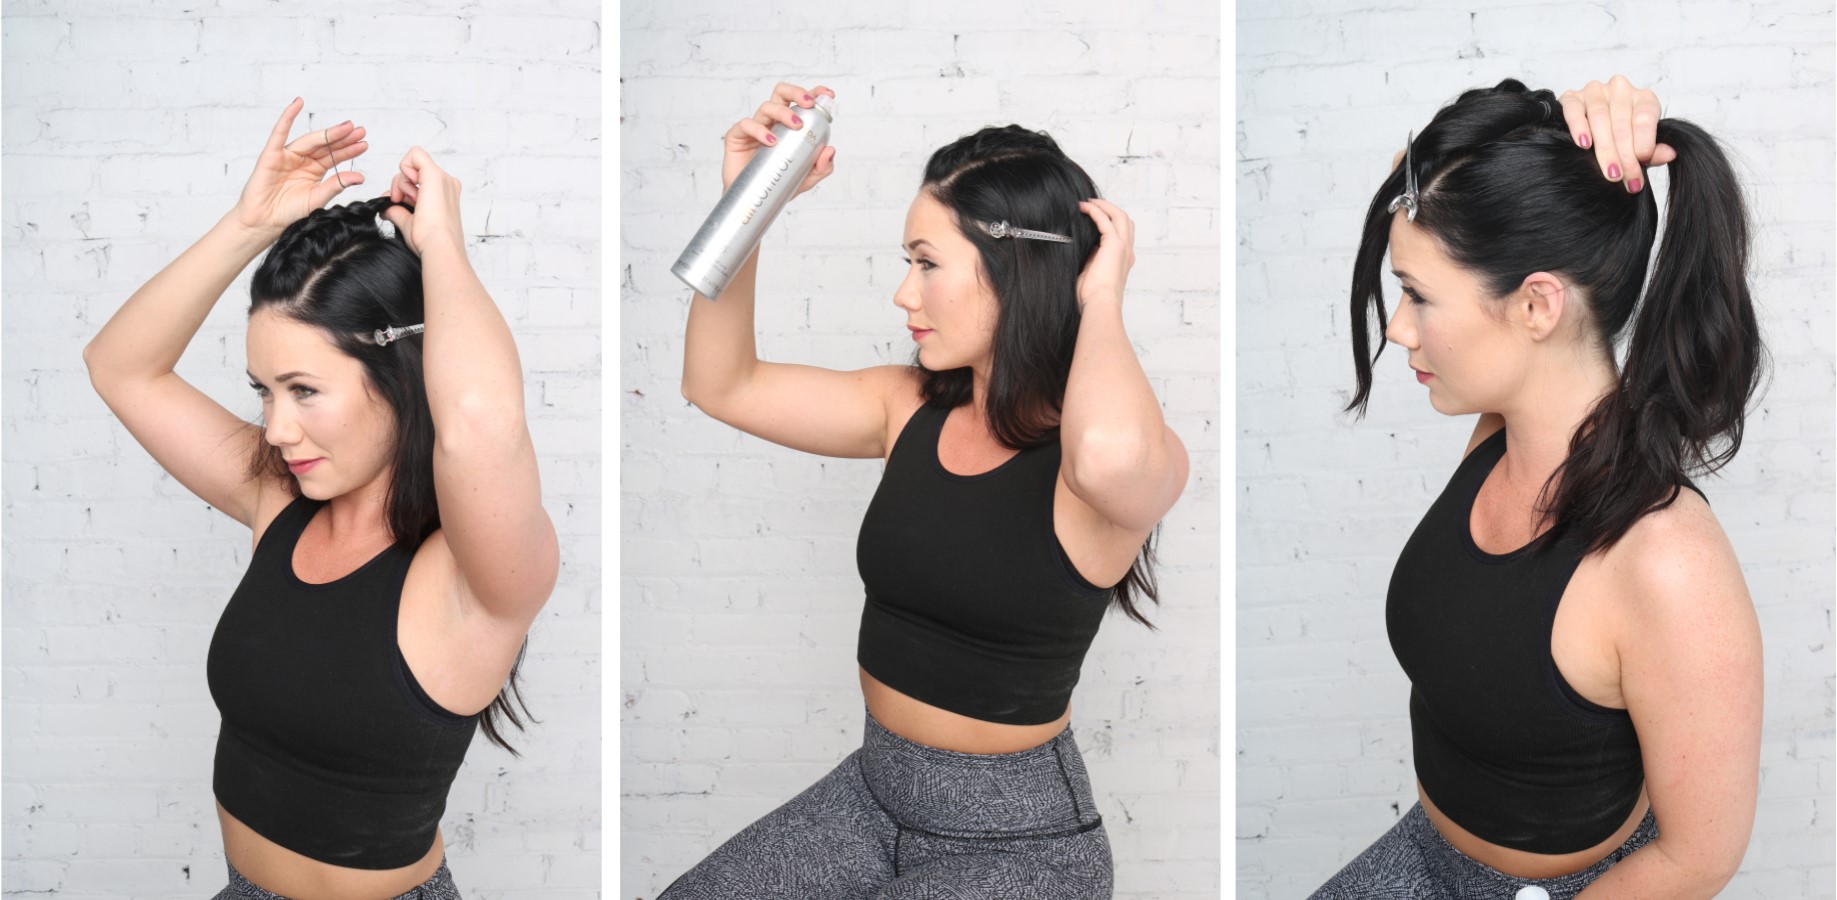 18 Ingenious Hair Hacks For The Gym